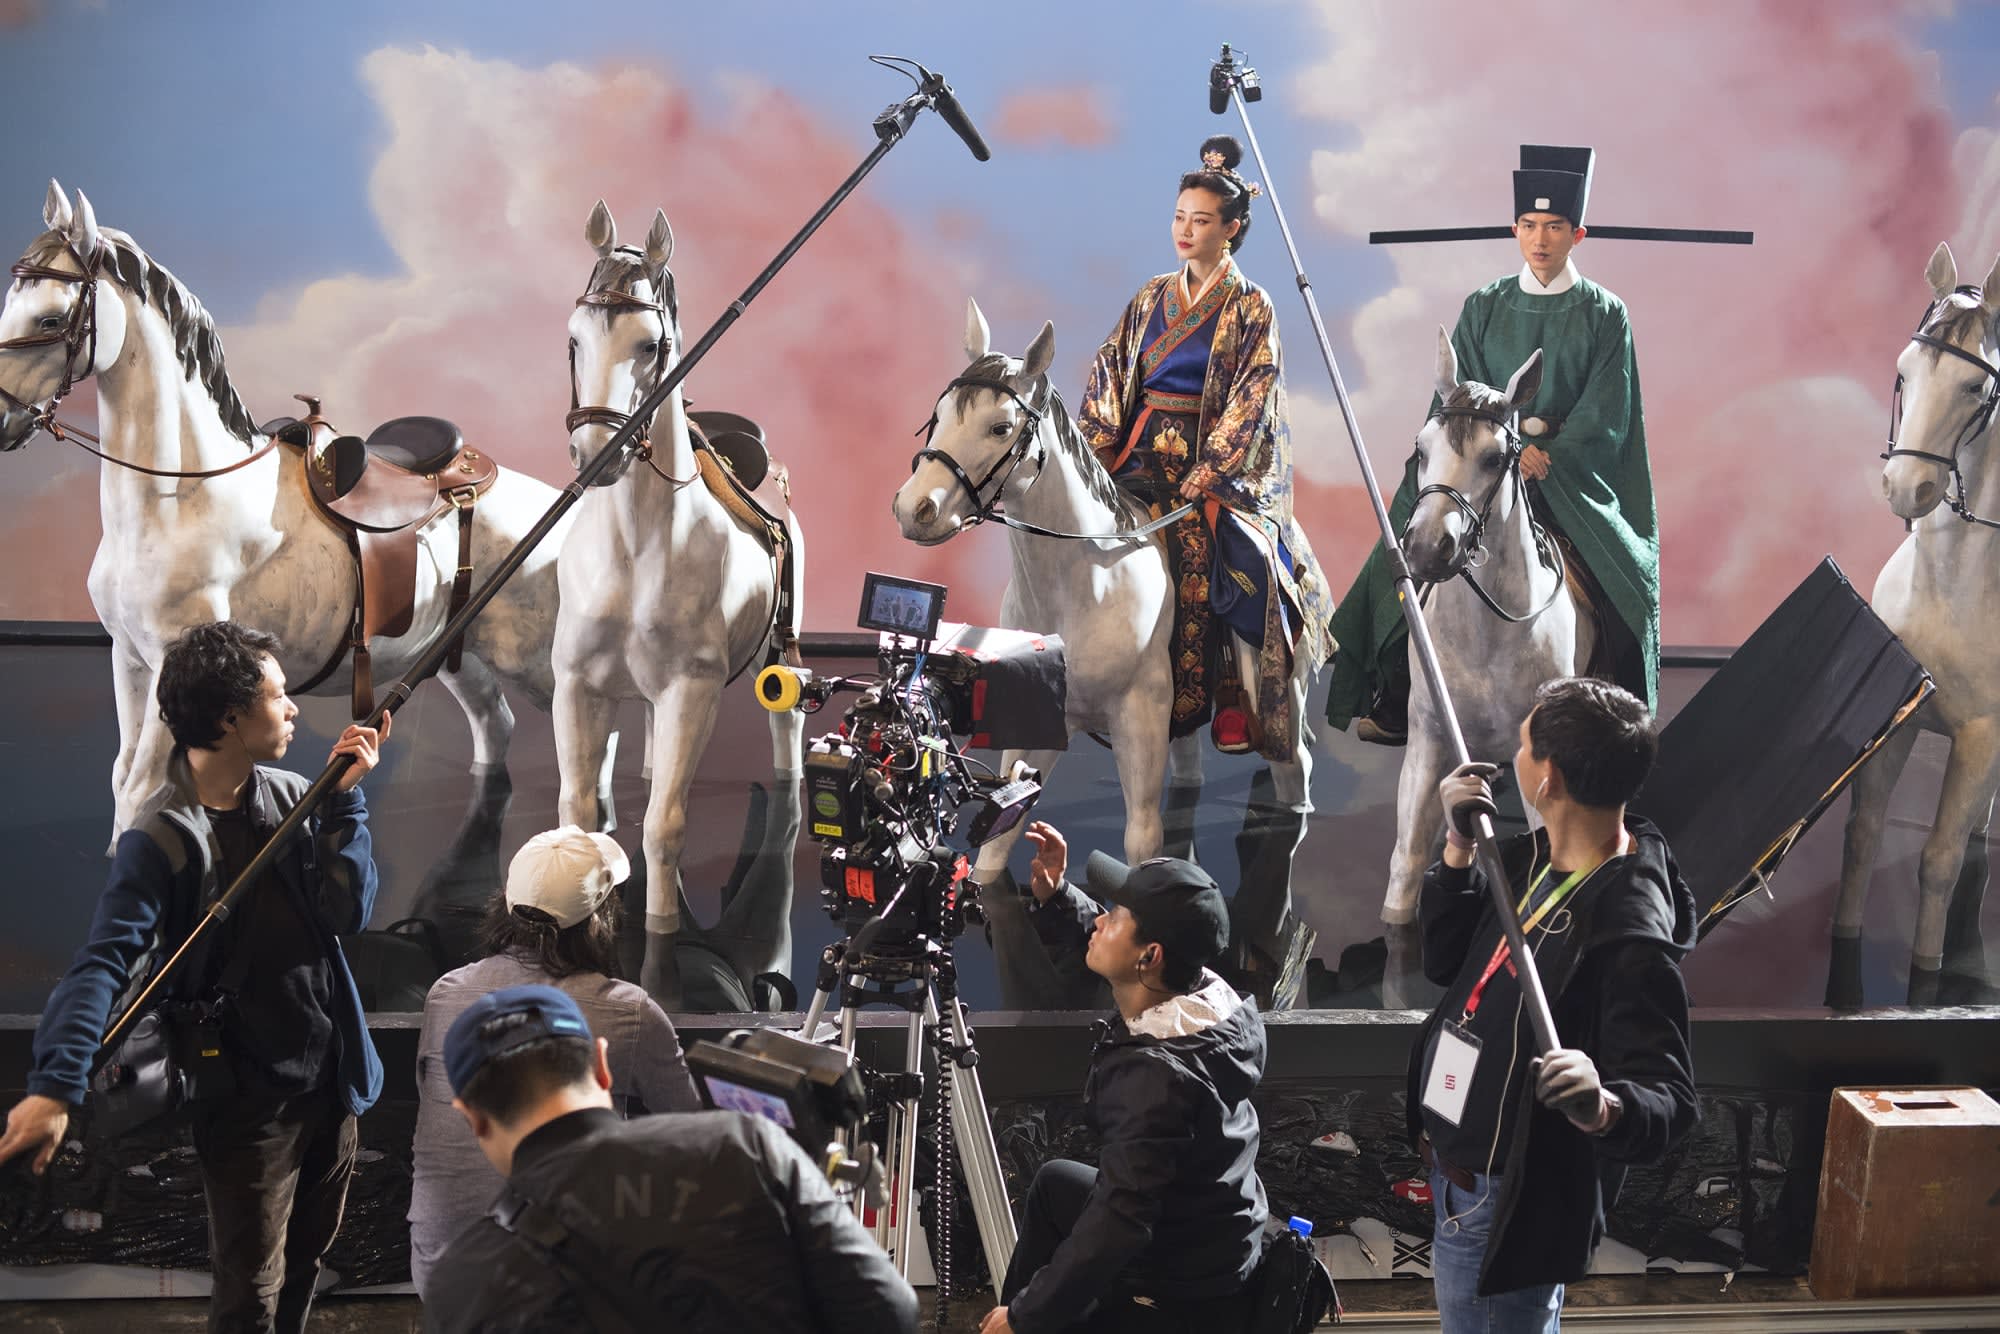 Photograph of five crew members with film equipment documenting a stage set of five horses, two traditionally dressed actors and a backdrop of pink clouds against a blue sky. 